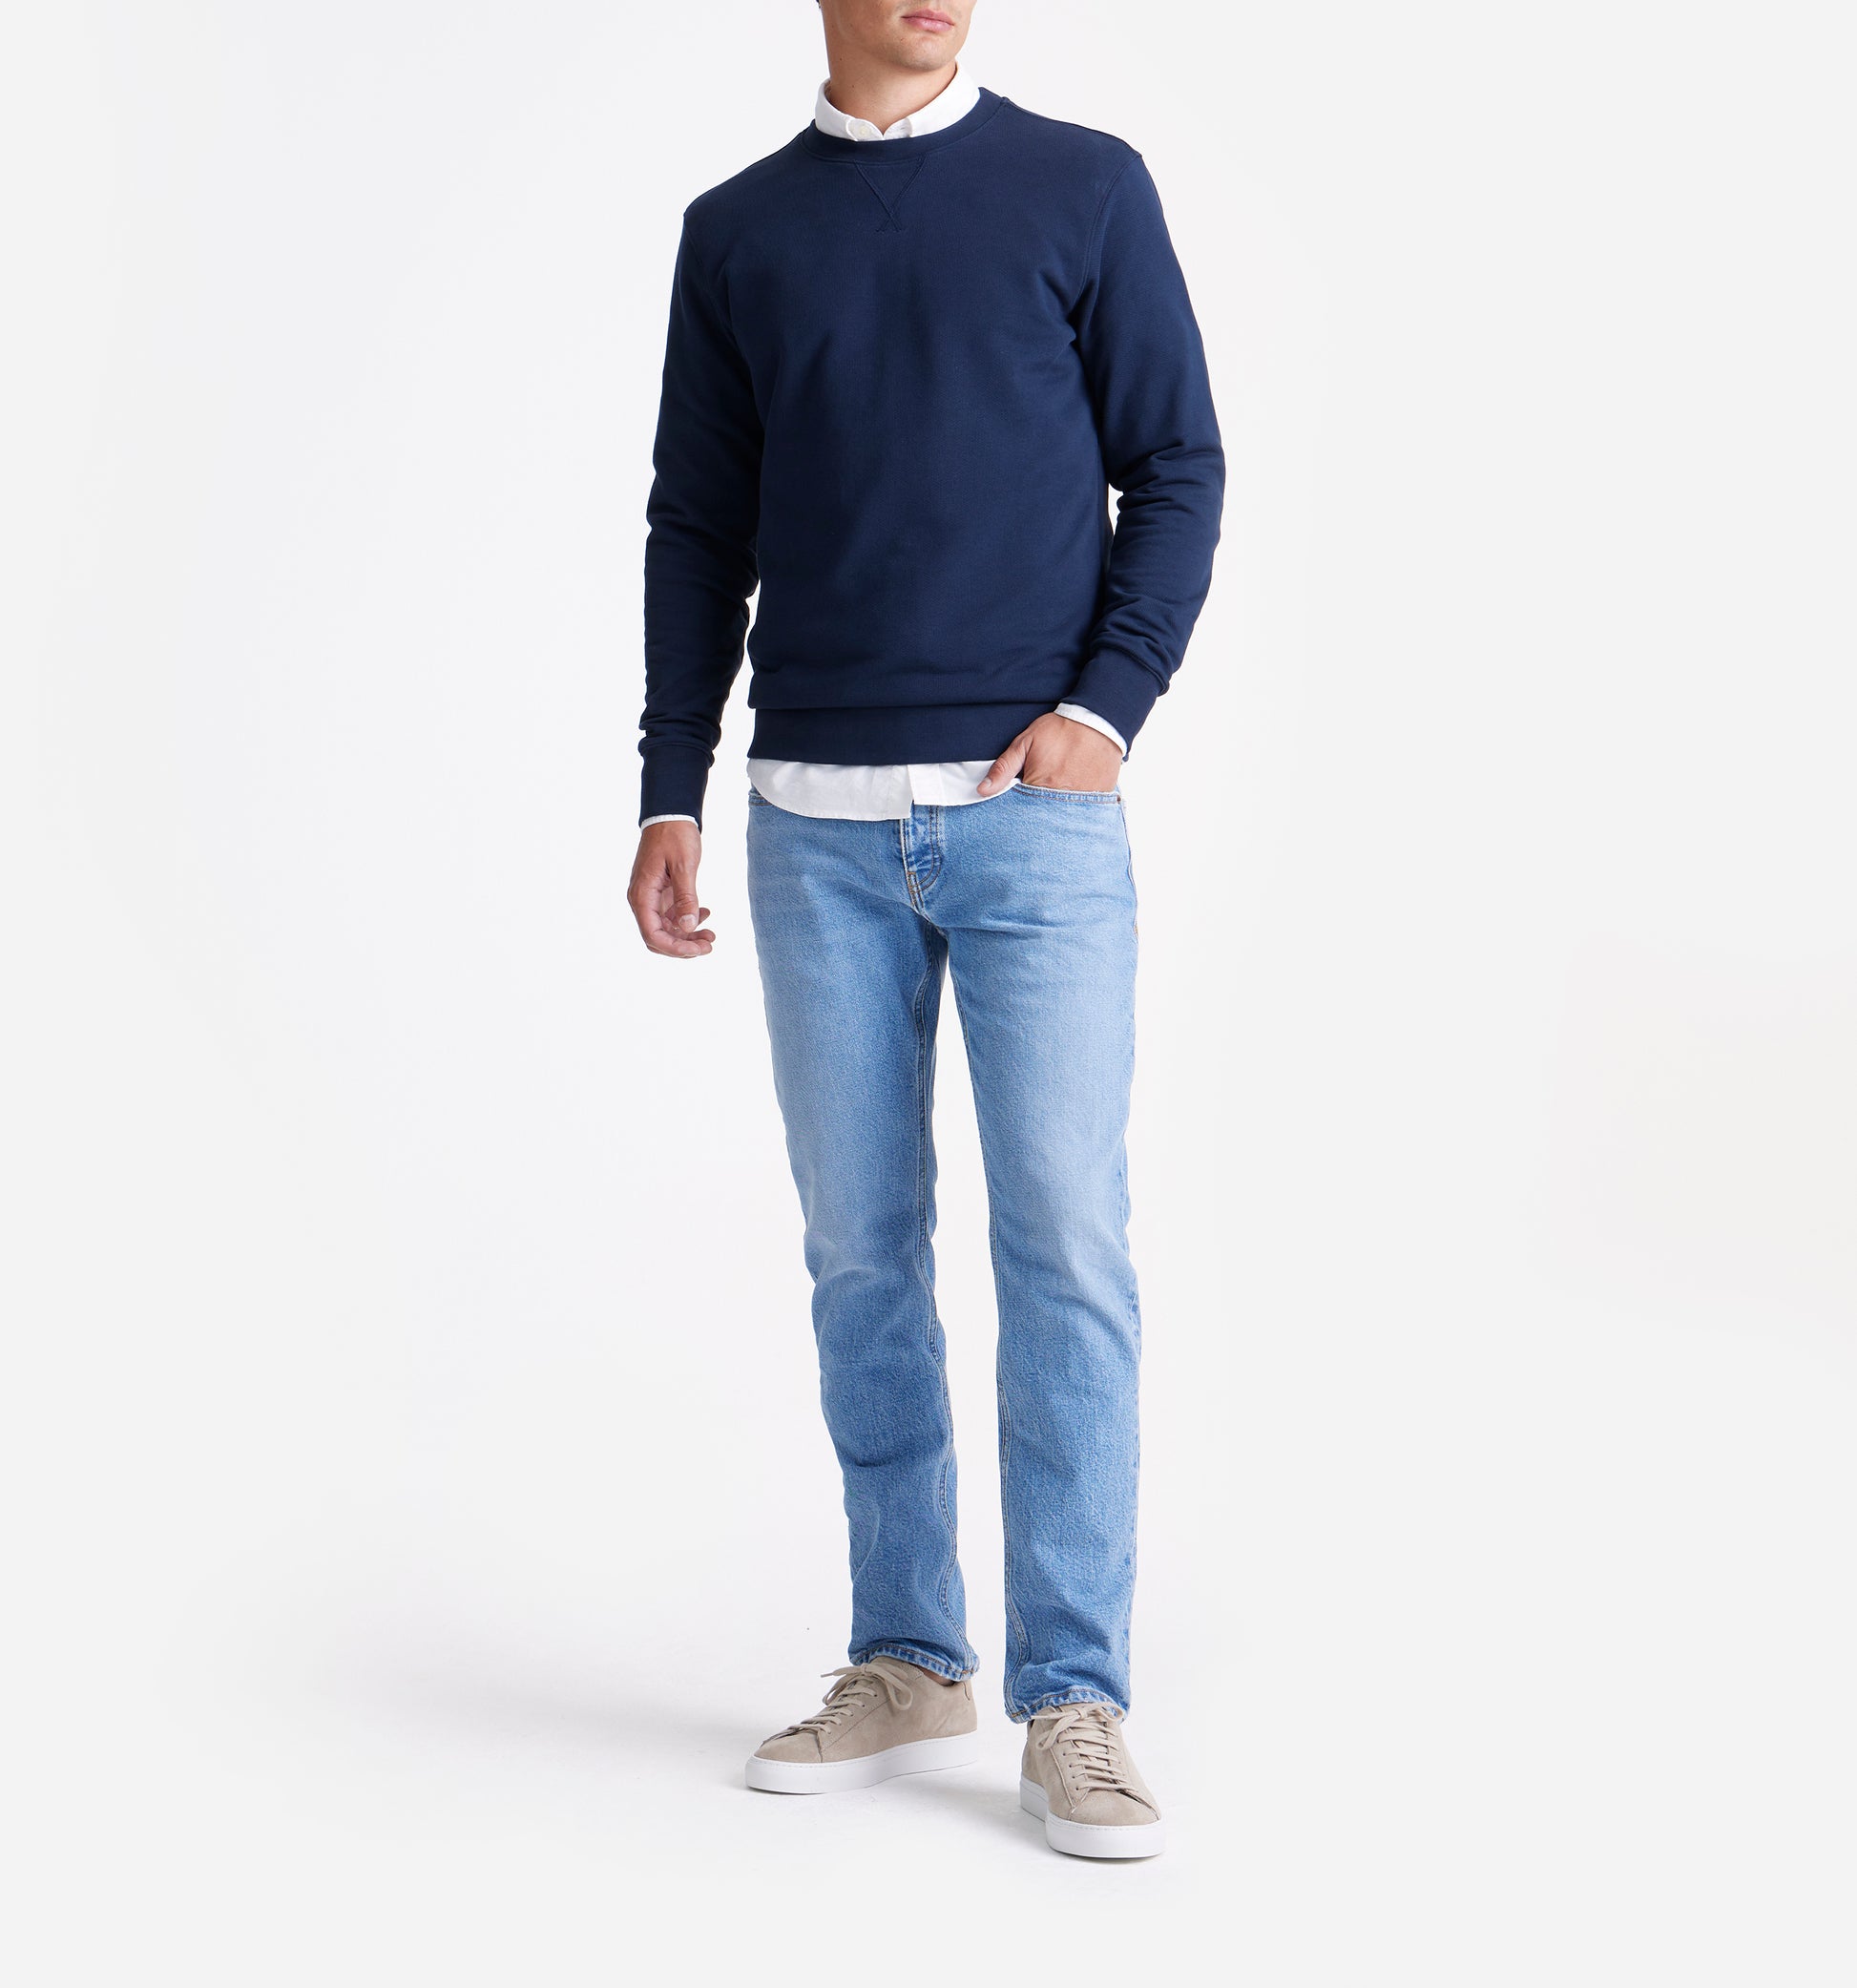 The George - French Terry Cotton Sweatshirt  In Navy From King Essentials